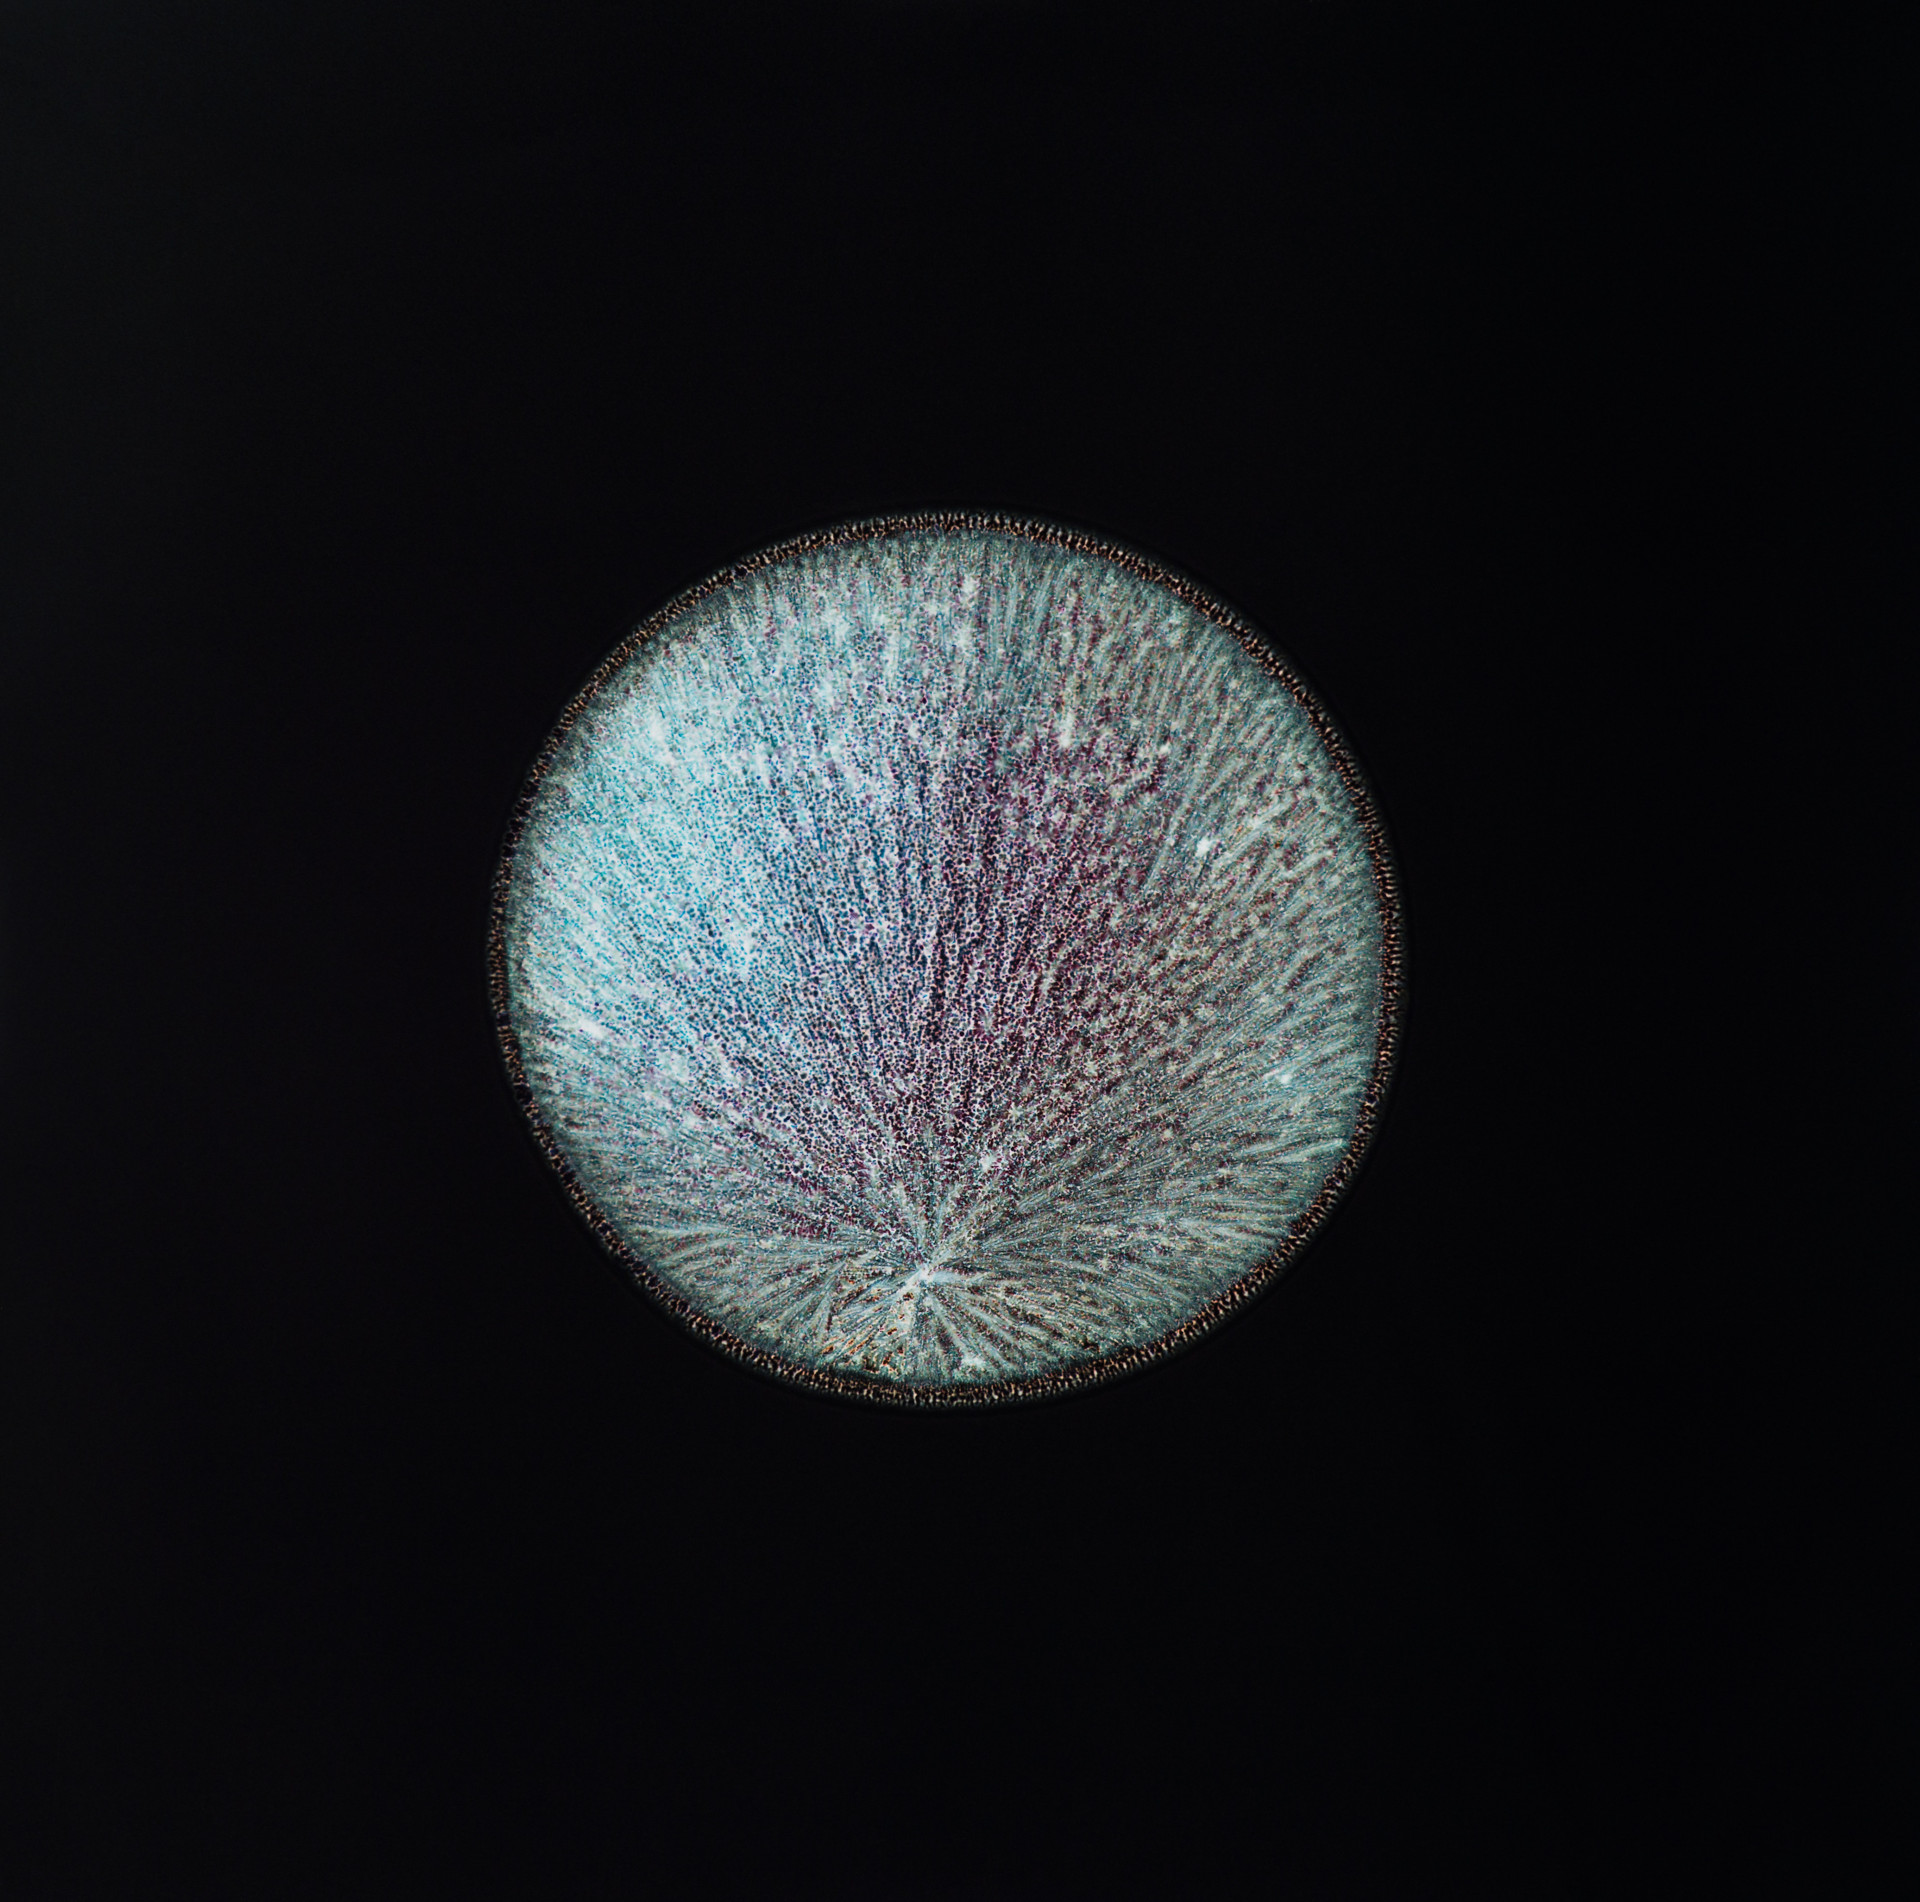 Sarah Schönfeld, All You Can Feel/ Planets, Dopamine, 2013, dopamine on photo negative, enlarged as C-Print, 70 x 70 cm (TECHNO WORLDS)